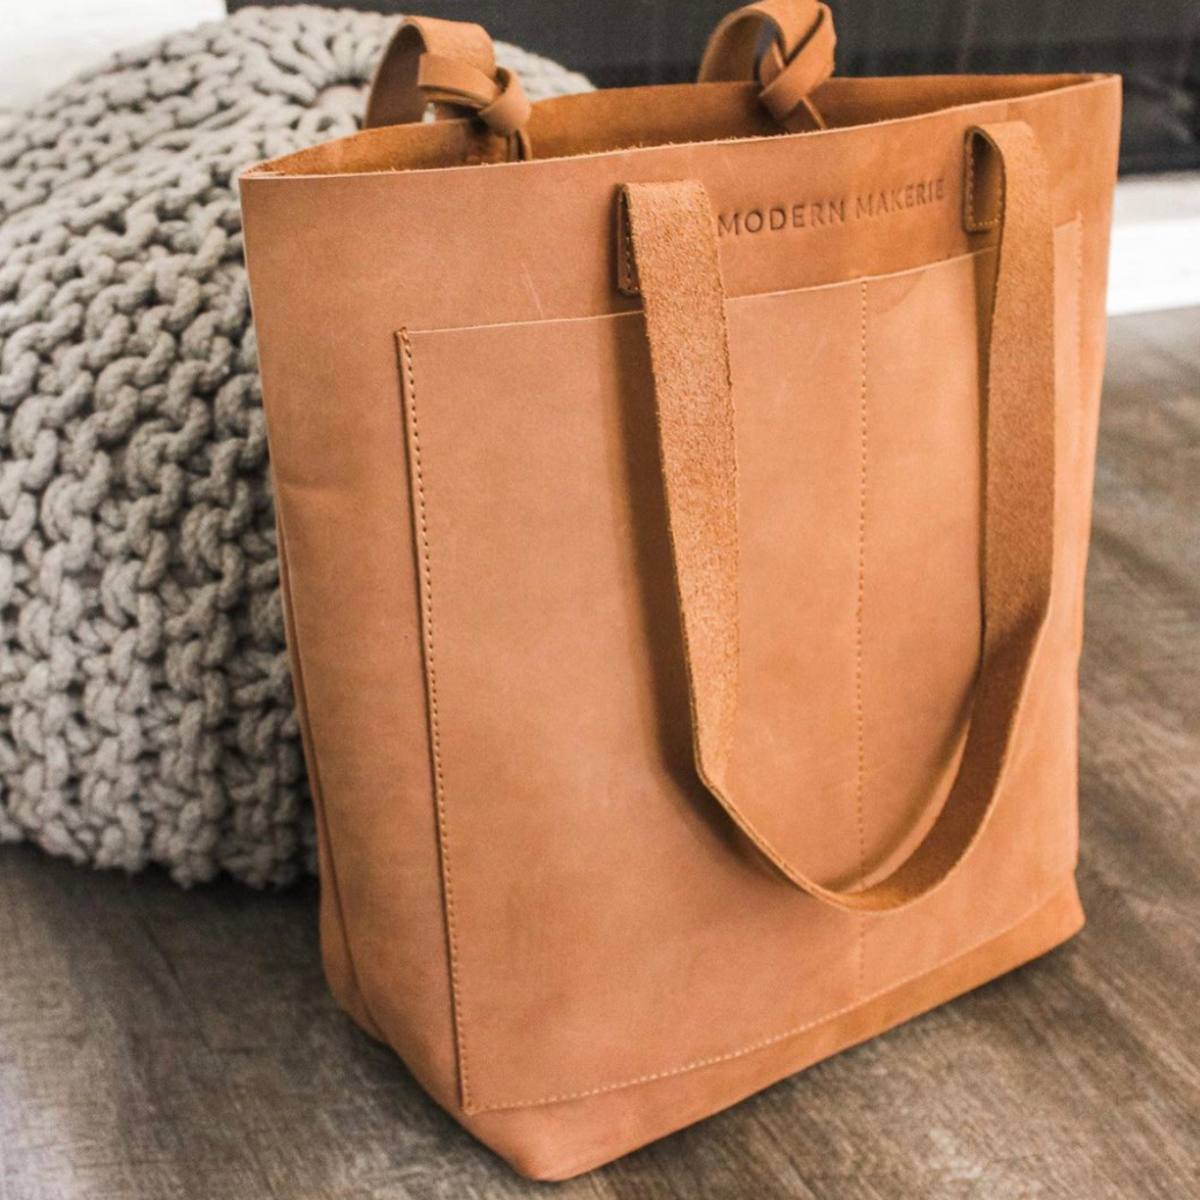 Totes READY TO SHIP - Modern Makerie